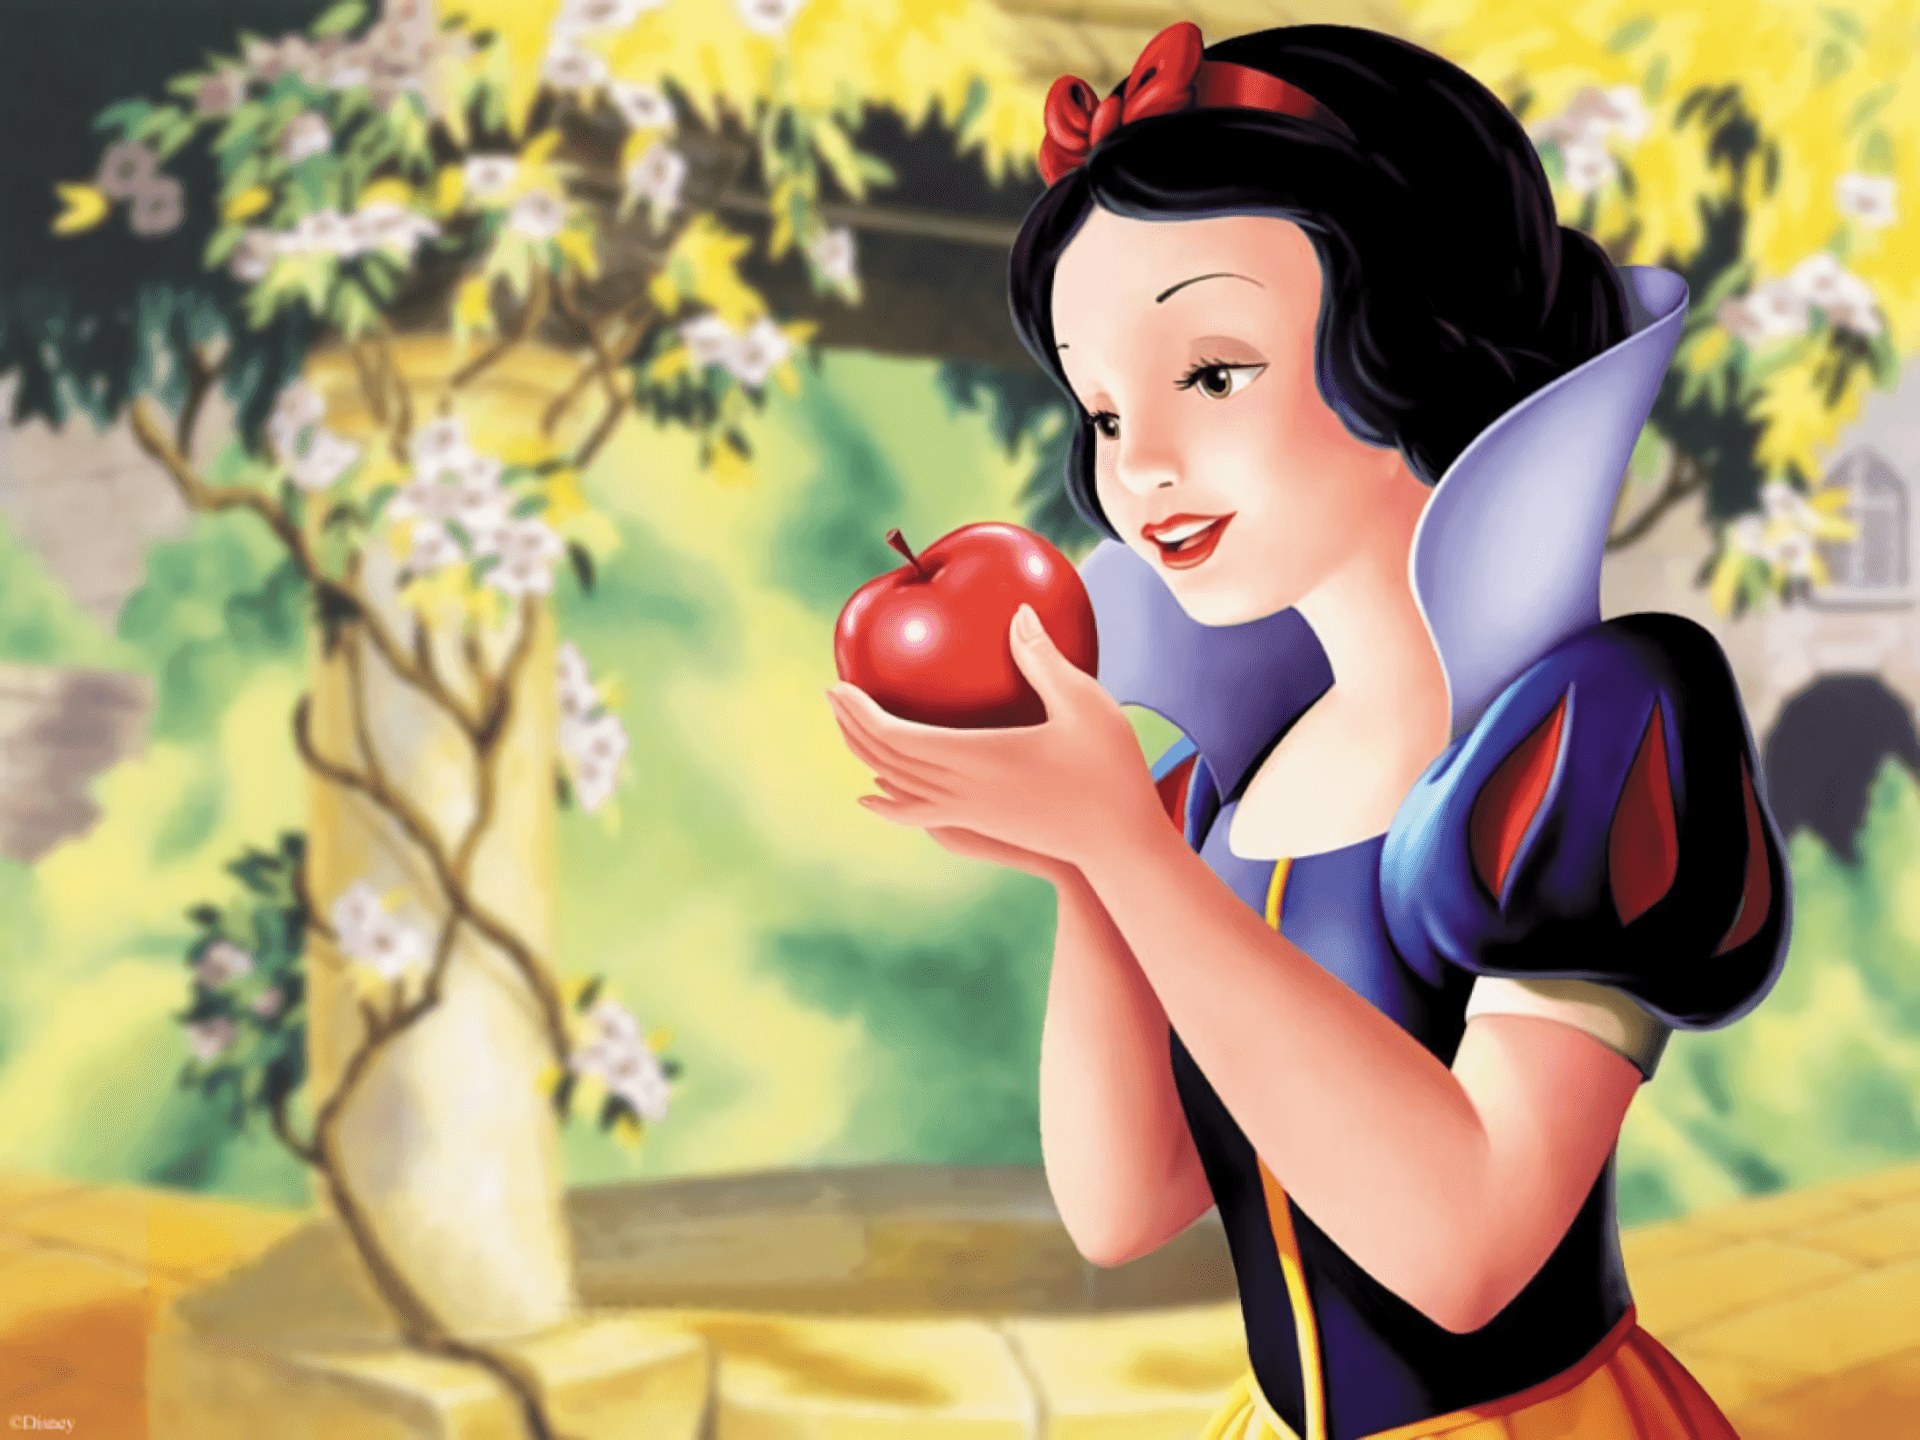 Enchanting Snow White And Seven Dwarfs In Fairytale Forest